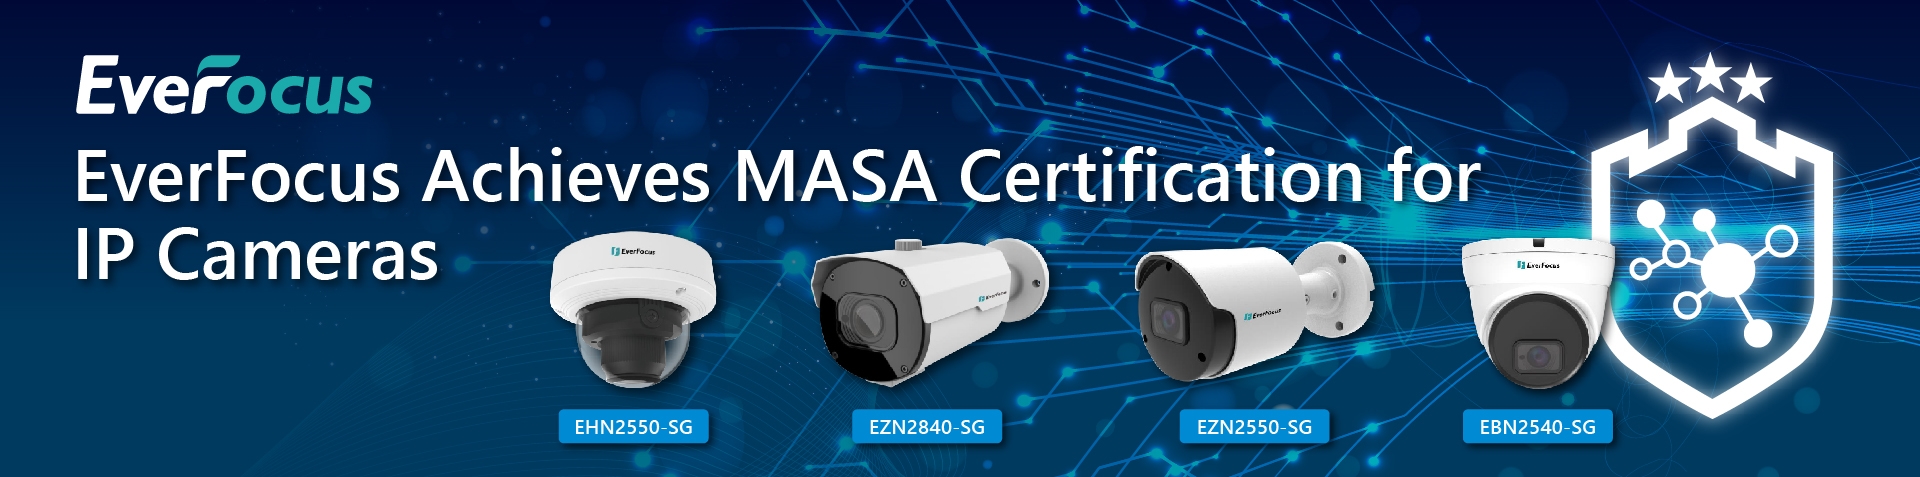 EverFocus IP Cameras Secure MASA Cybersecurity Certification, Setting a New Standard for Safety